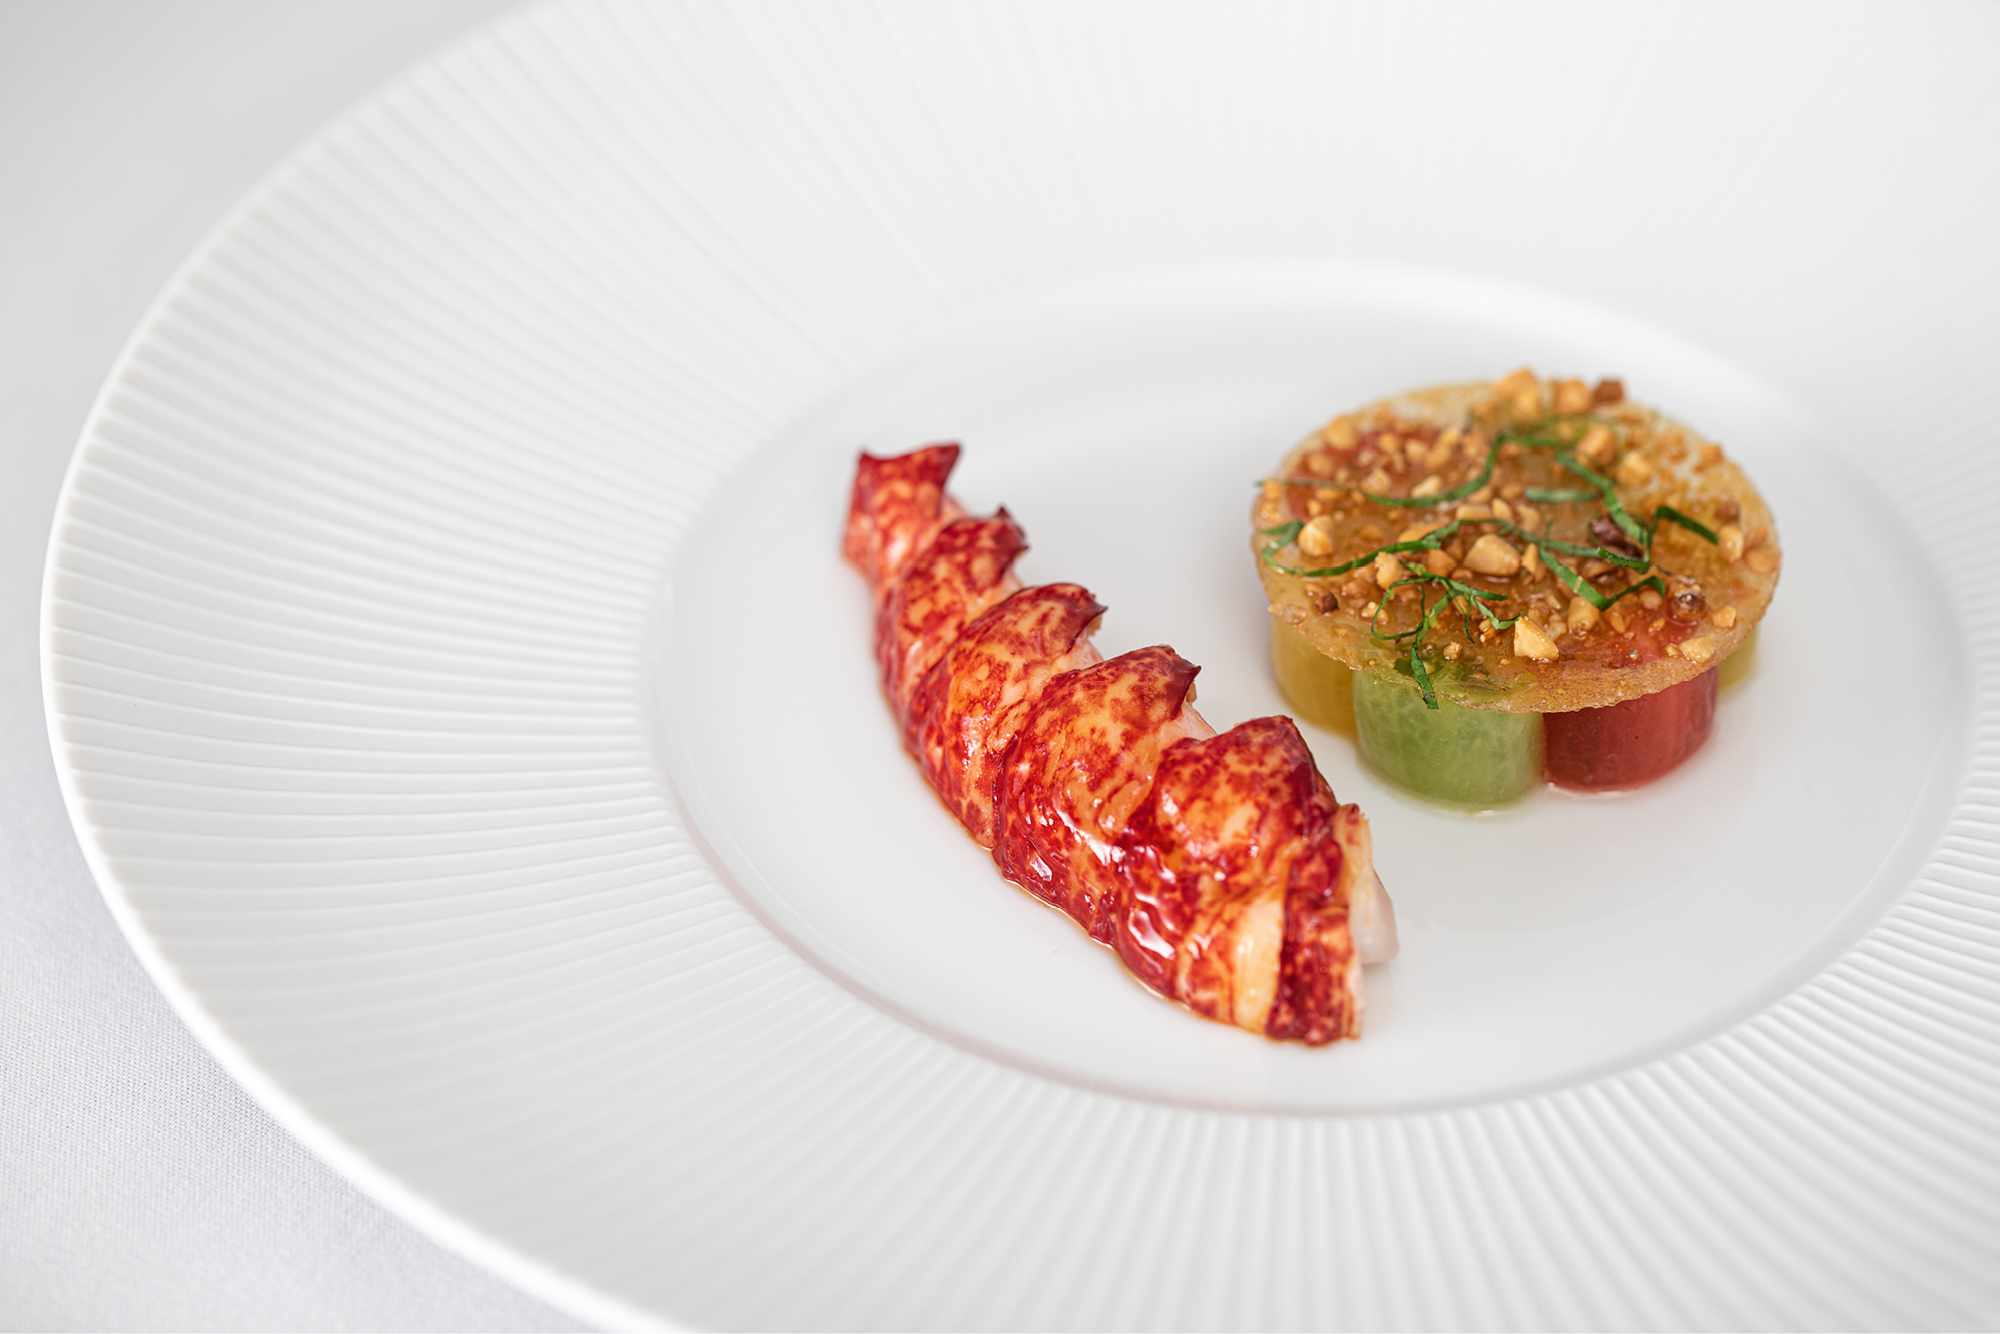 Poached native lobster with Isle of Wight tomato, pine nut and basil, one of the signature dishes at Ormer Mayfair by Sofian